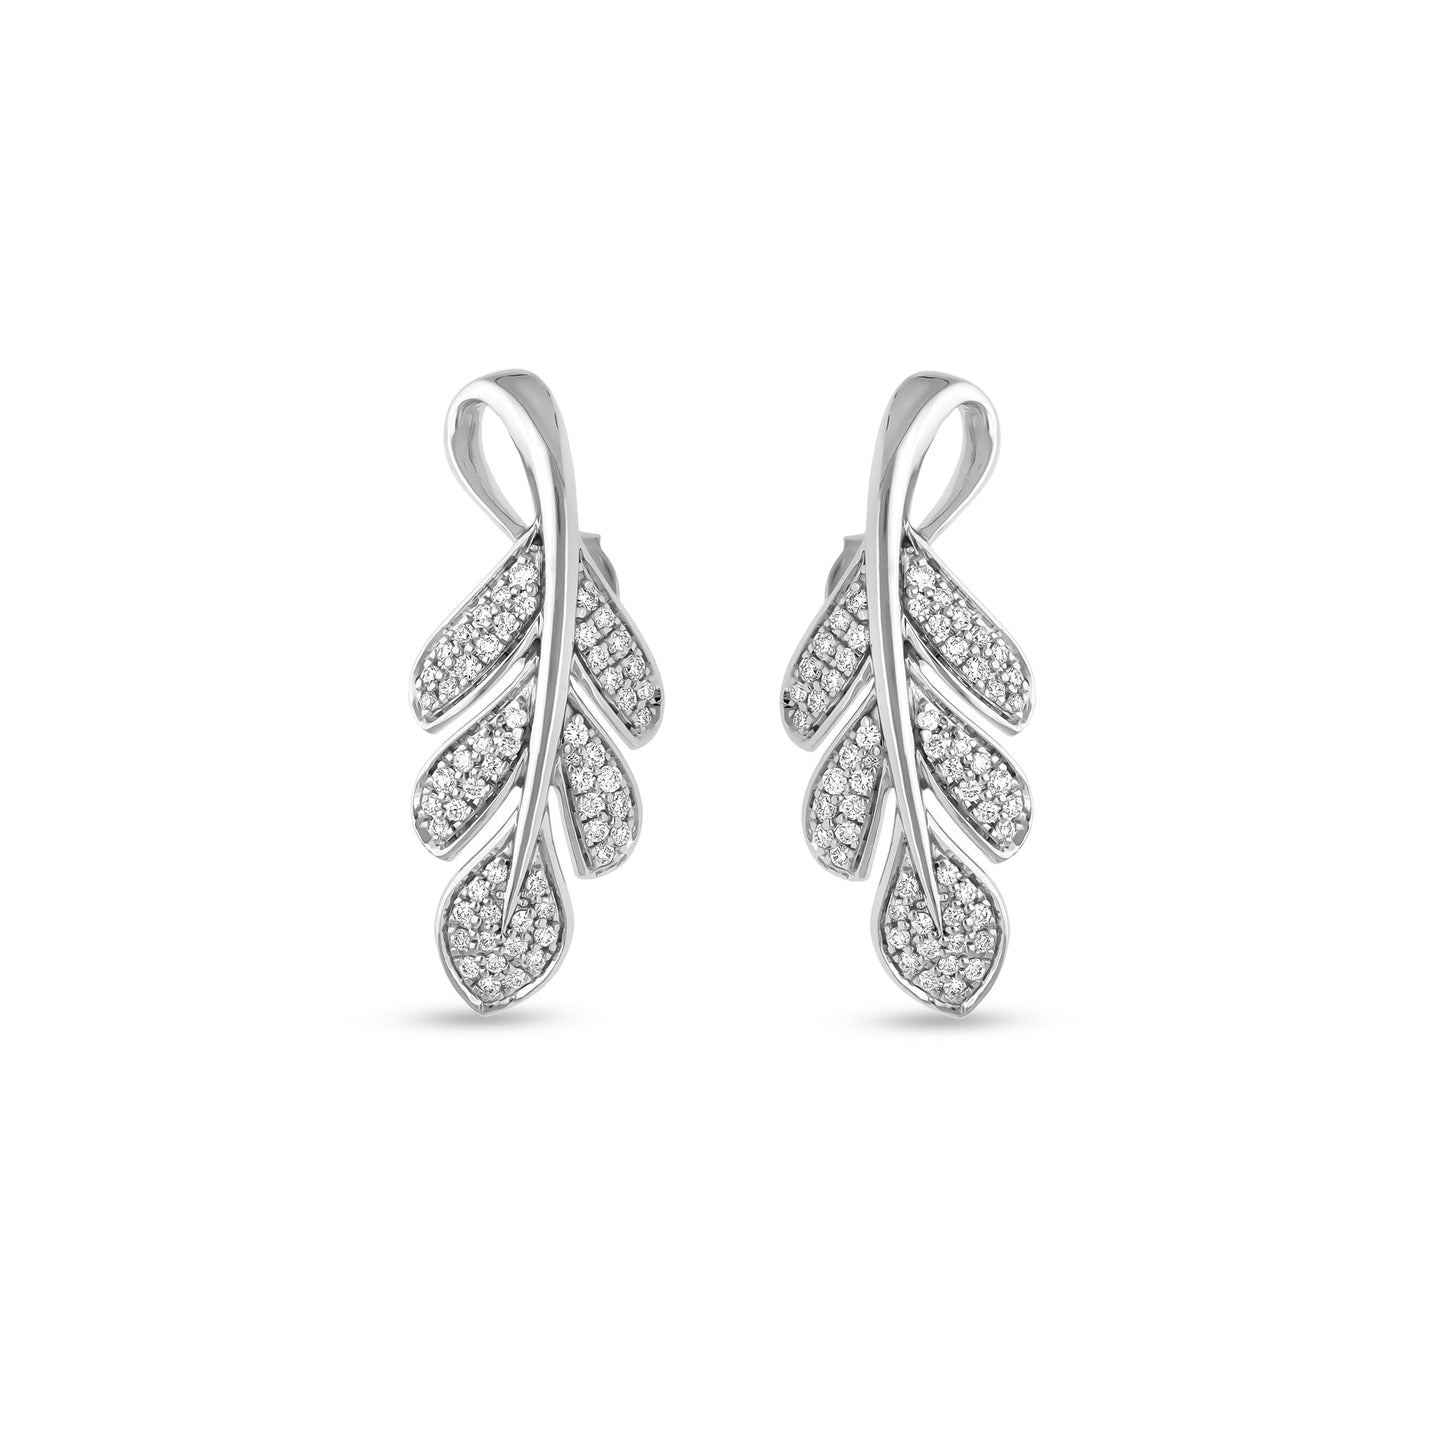 Two Leaf Round Natural Cut Diamond white Gold Twist Necklace Set